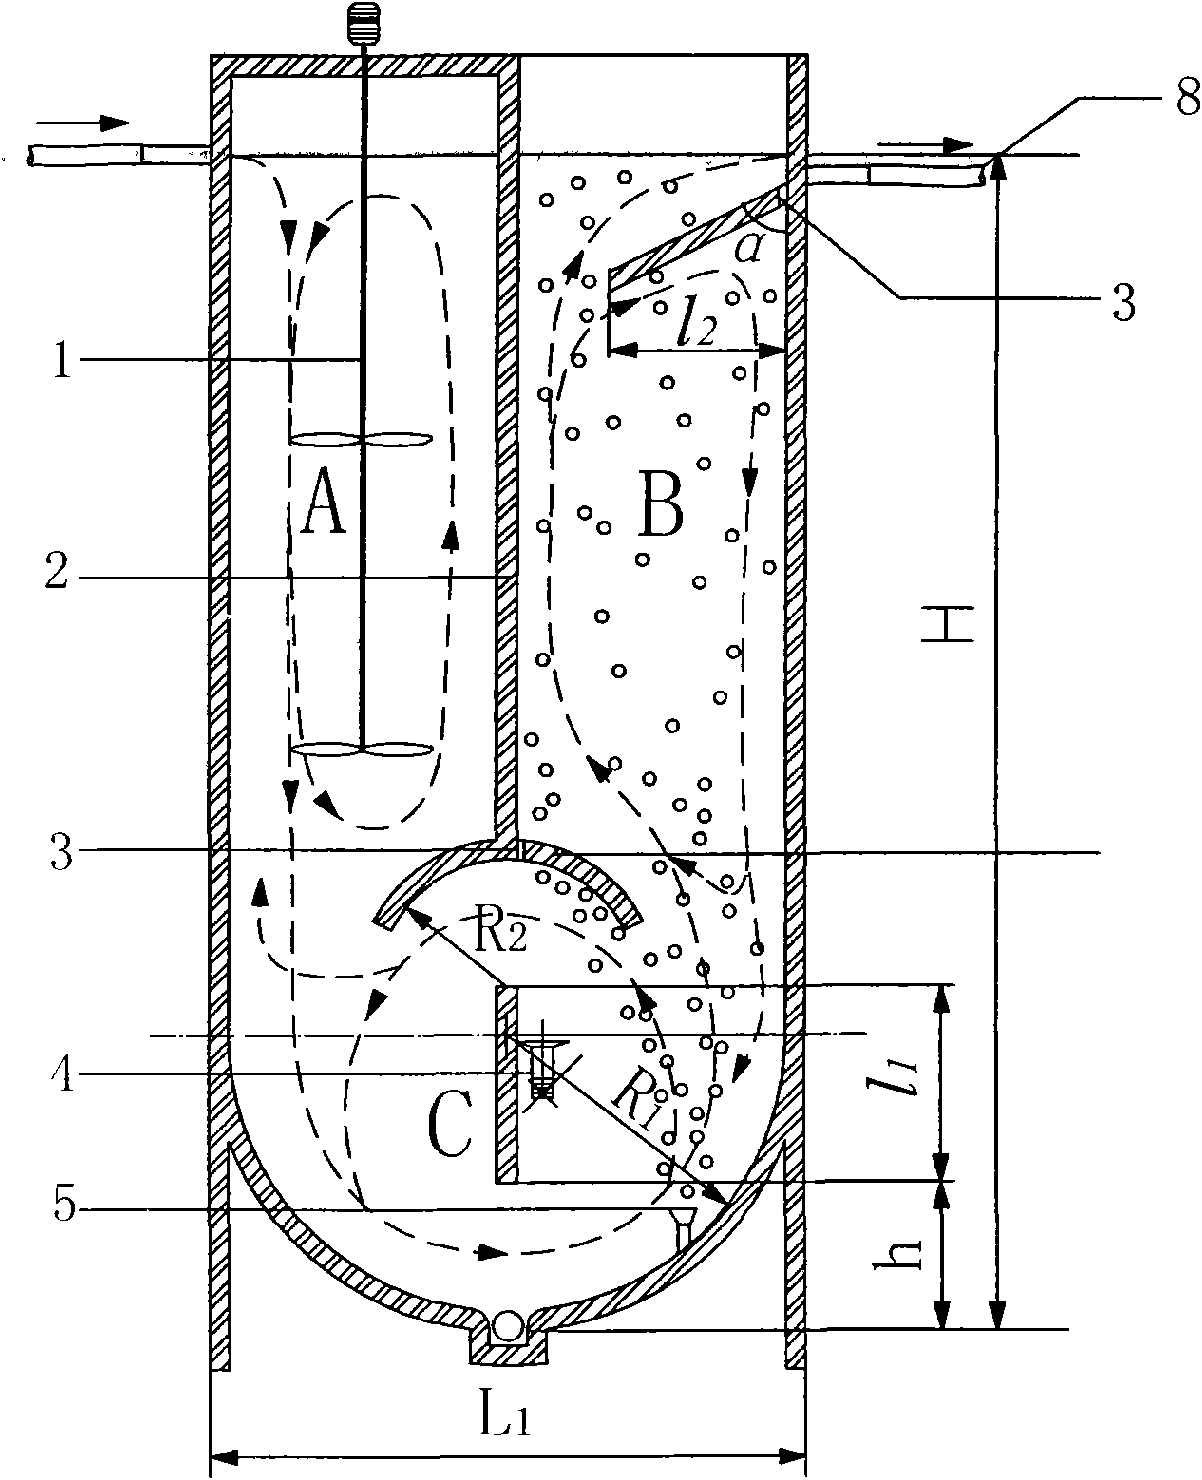 Method for controlling residual sludge reduction in activated sludge-sewage treatment system and reactor